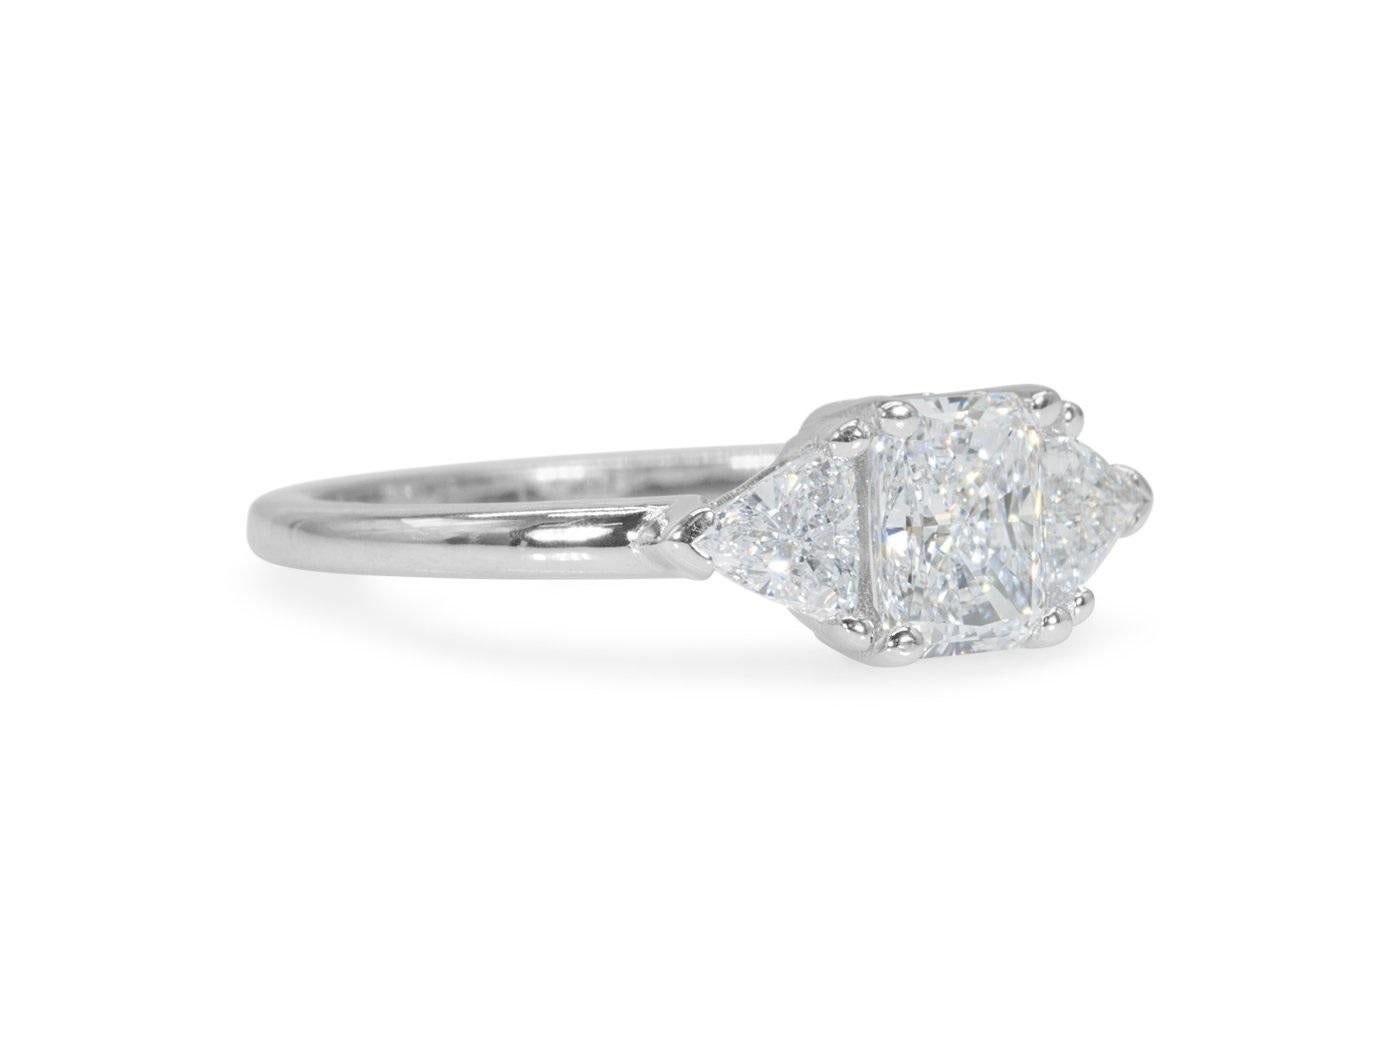 Women's Sparkling 18k White Gold 3 Stone Ring with 0.80 Ct Natural Diamonds GIA Cert For Sale